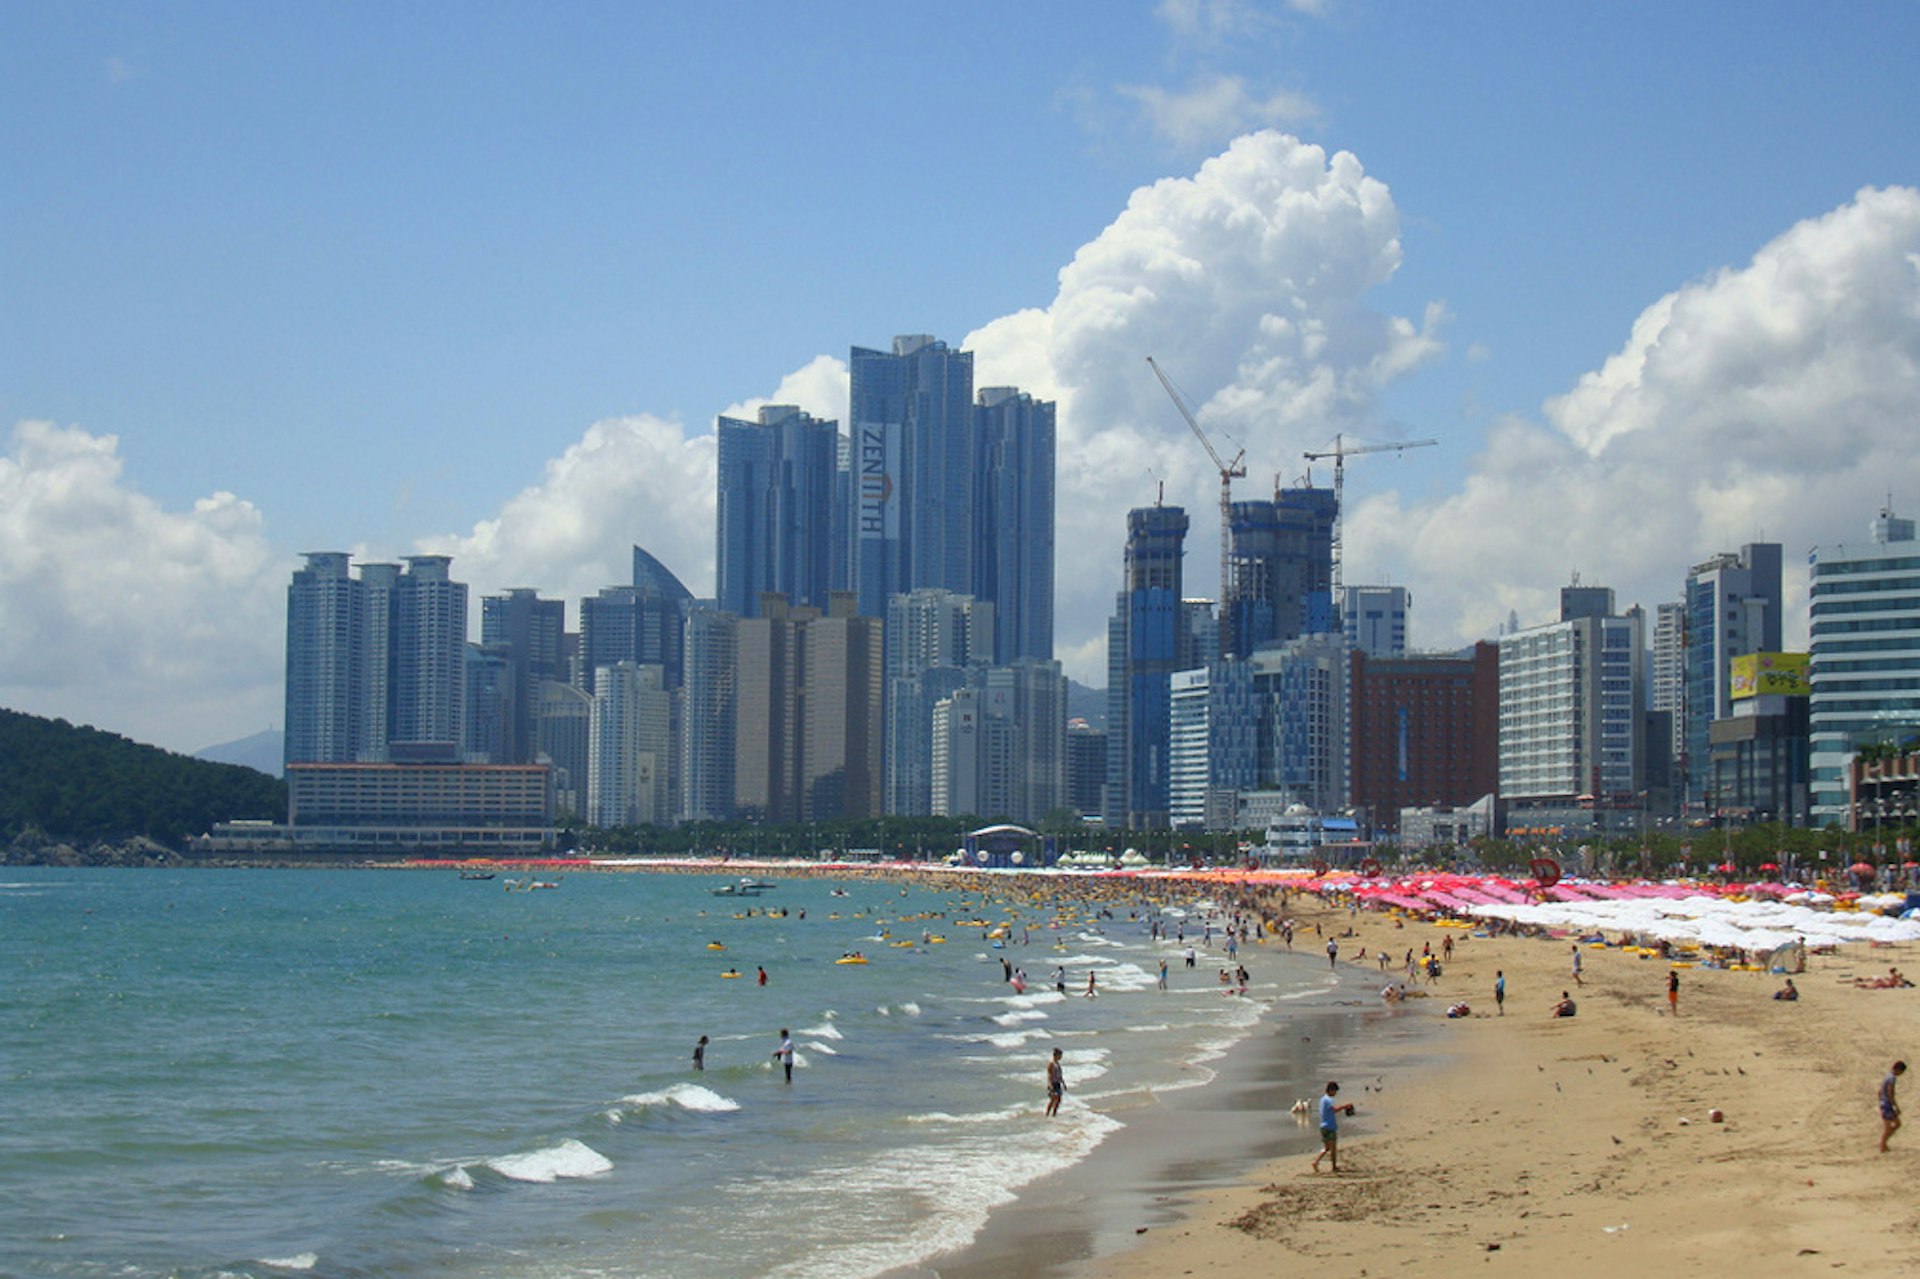 Haeundae: a beachy oasis in the city. Image by Jens-Olaf Walter / CC BY 2.0